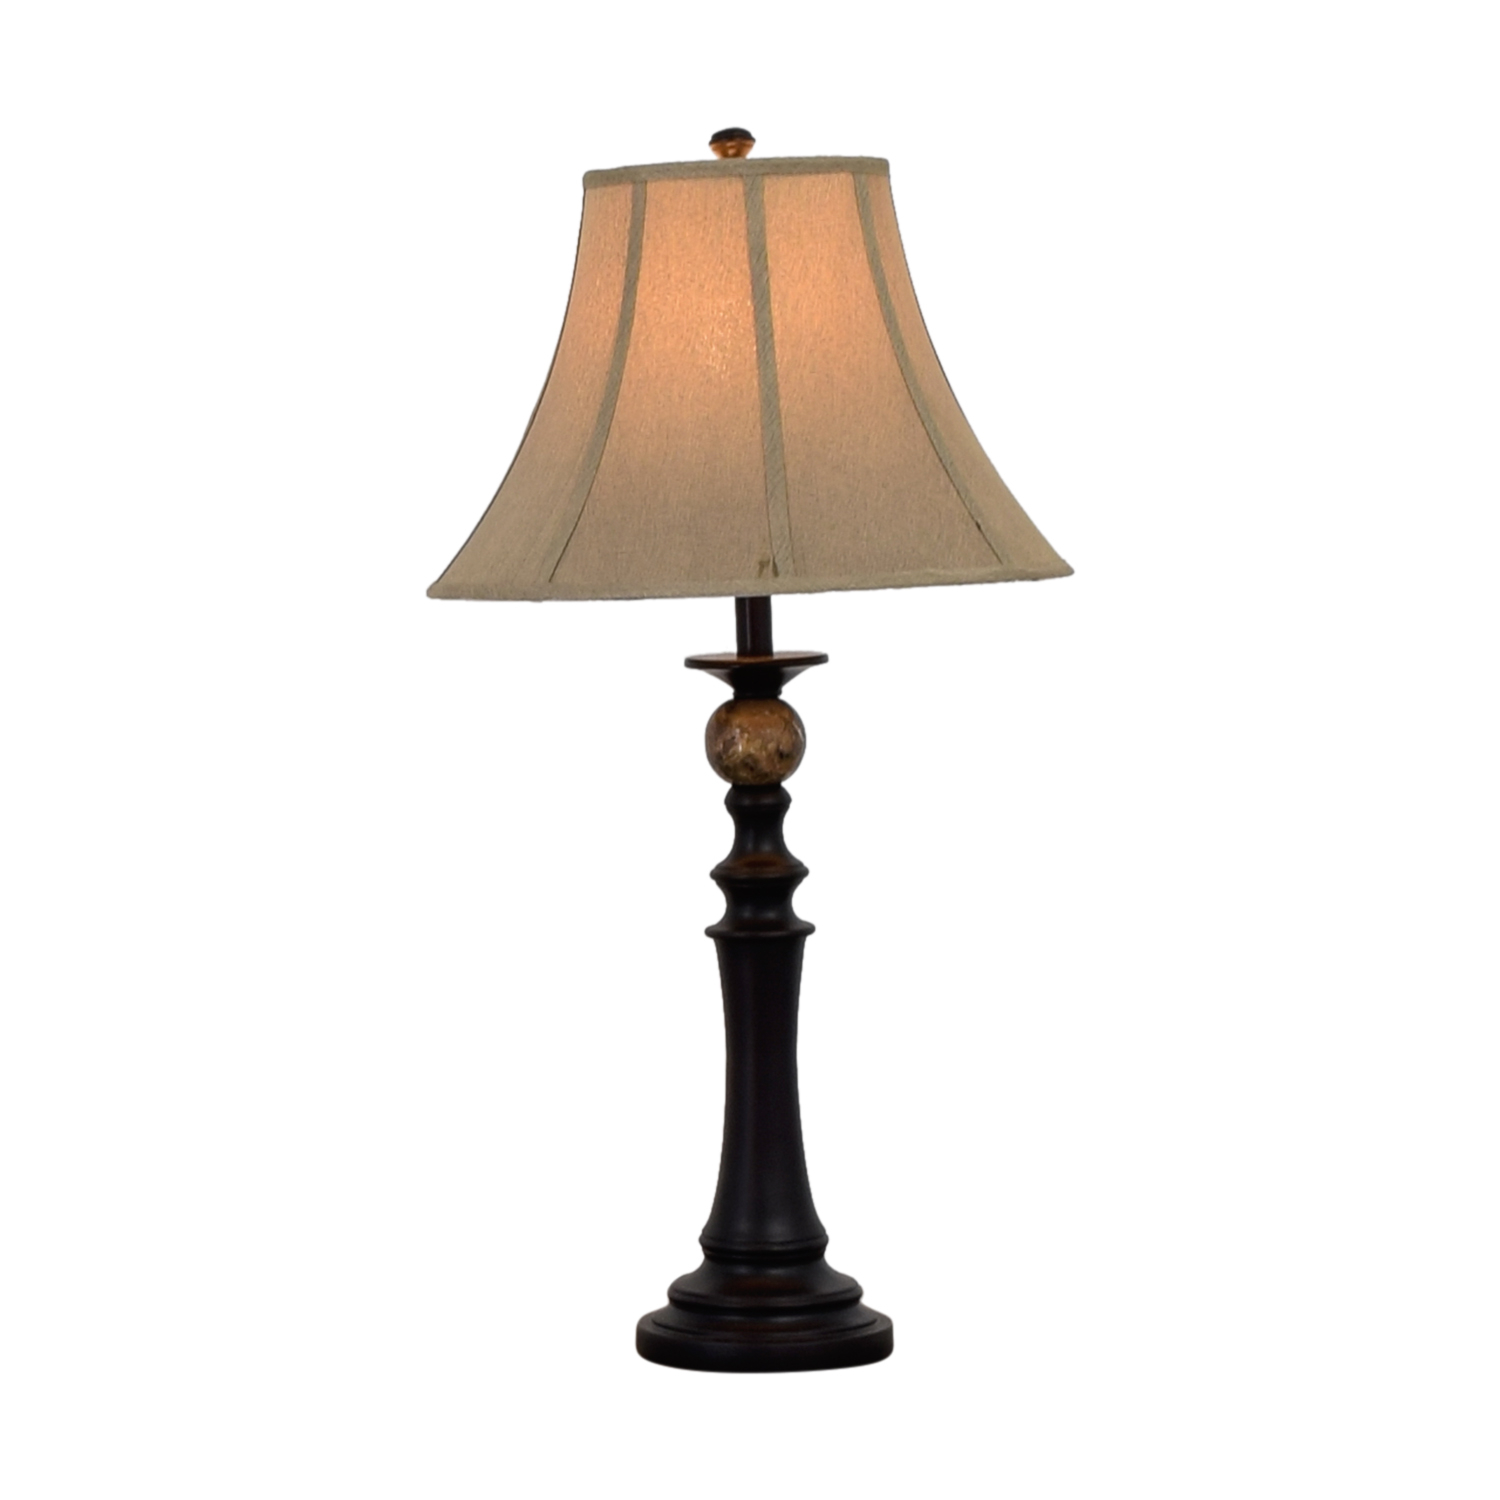 65 Off Raymour Flanigan Raymour Flanigan Marble And Wood Table Lamp Decor within sizing 1500 X 1500